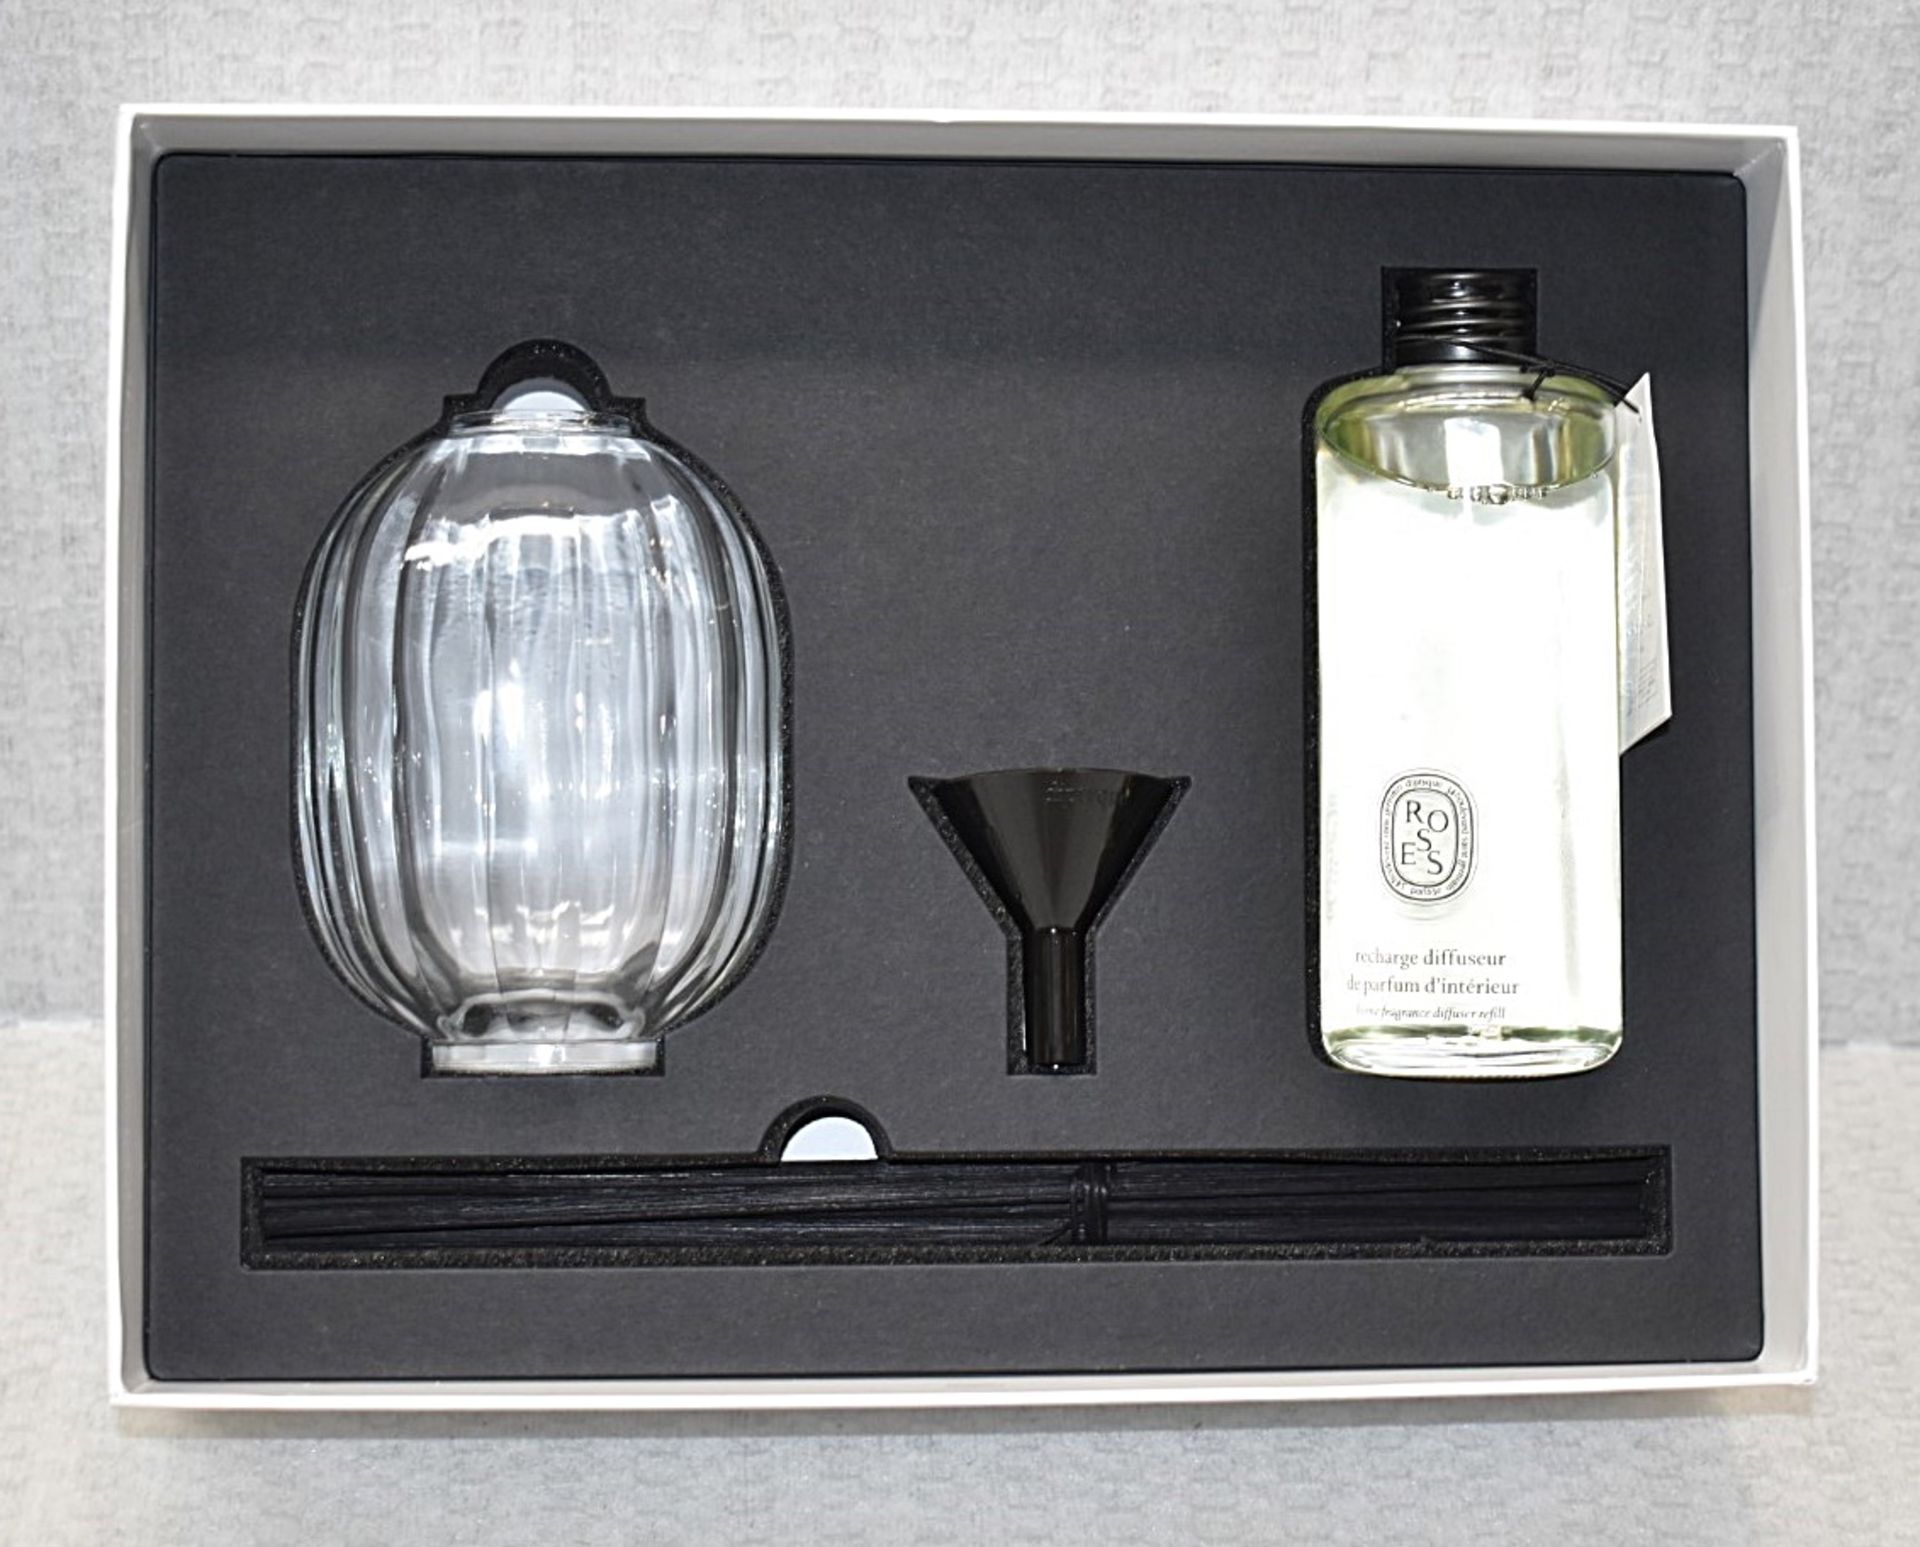 1 x DIPTYQUE 'Roses' Luxury Diffuser with Frangrance and Reeds (200ml) - Original Price £152.00 - Image 2 of 6